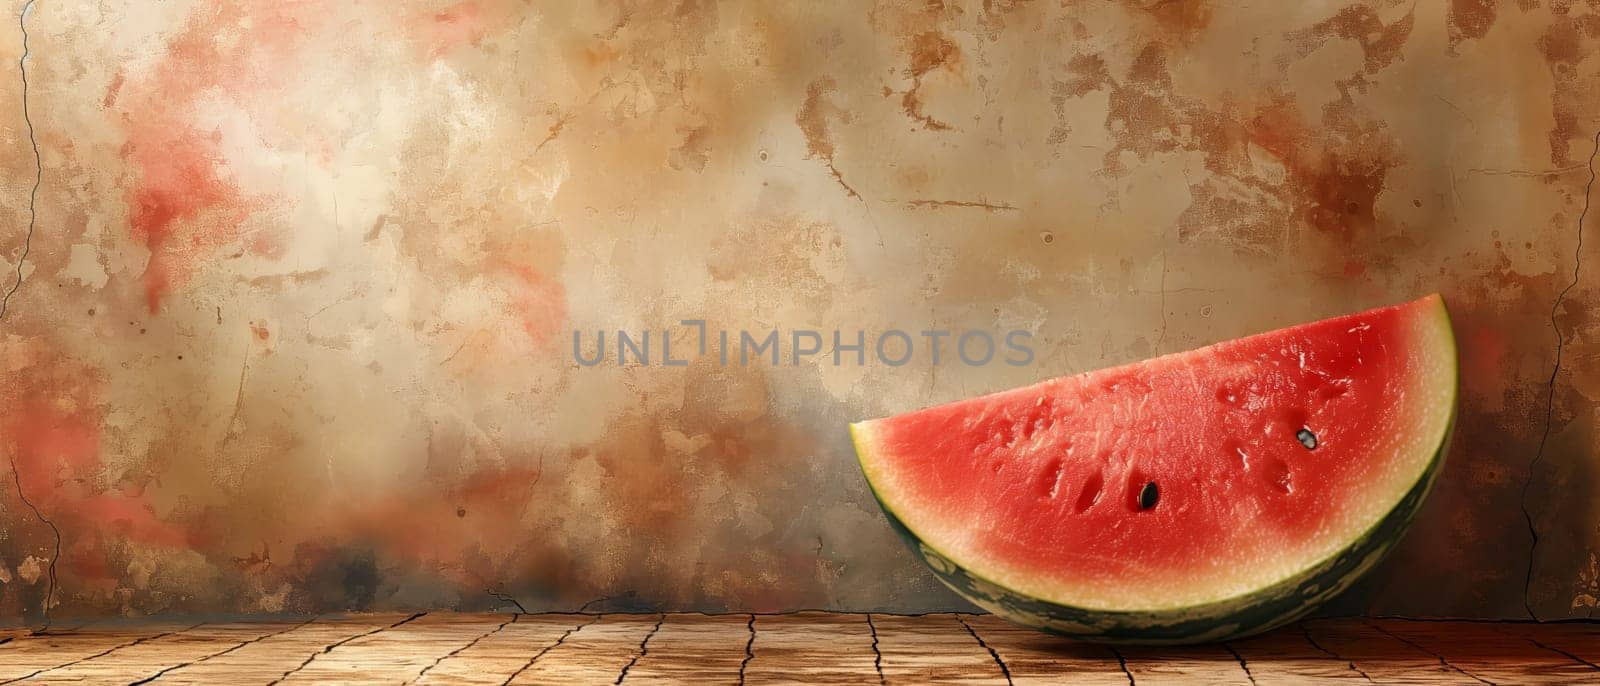 Ripe juicy watermelon on a texture background. by Fischeron